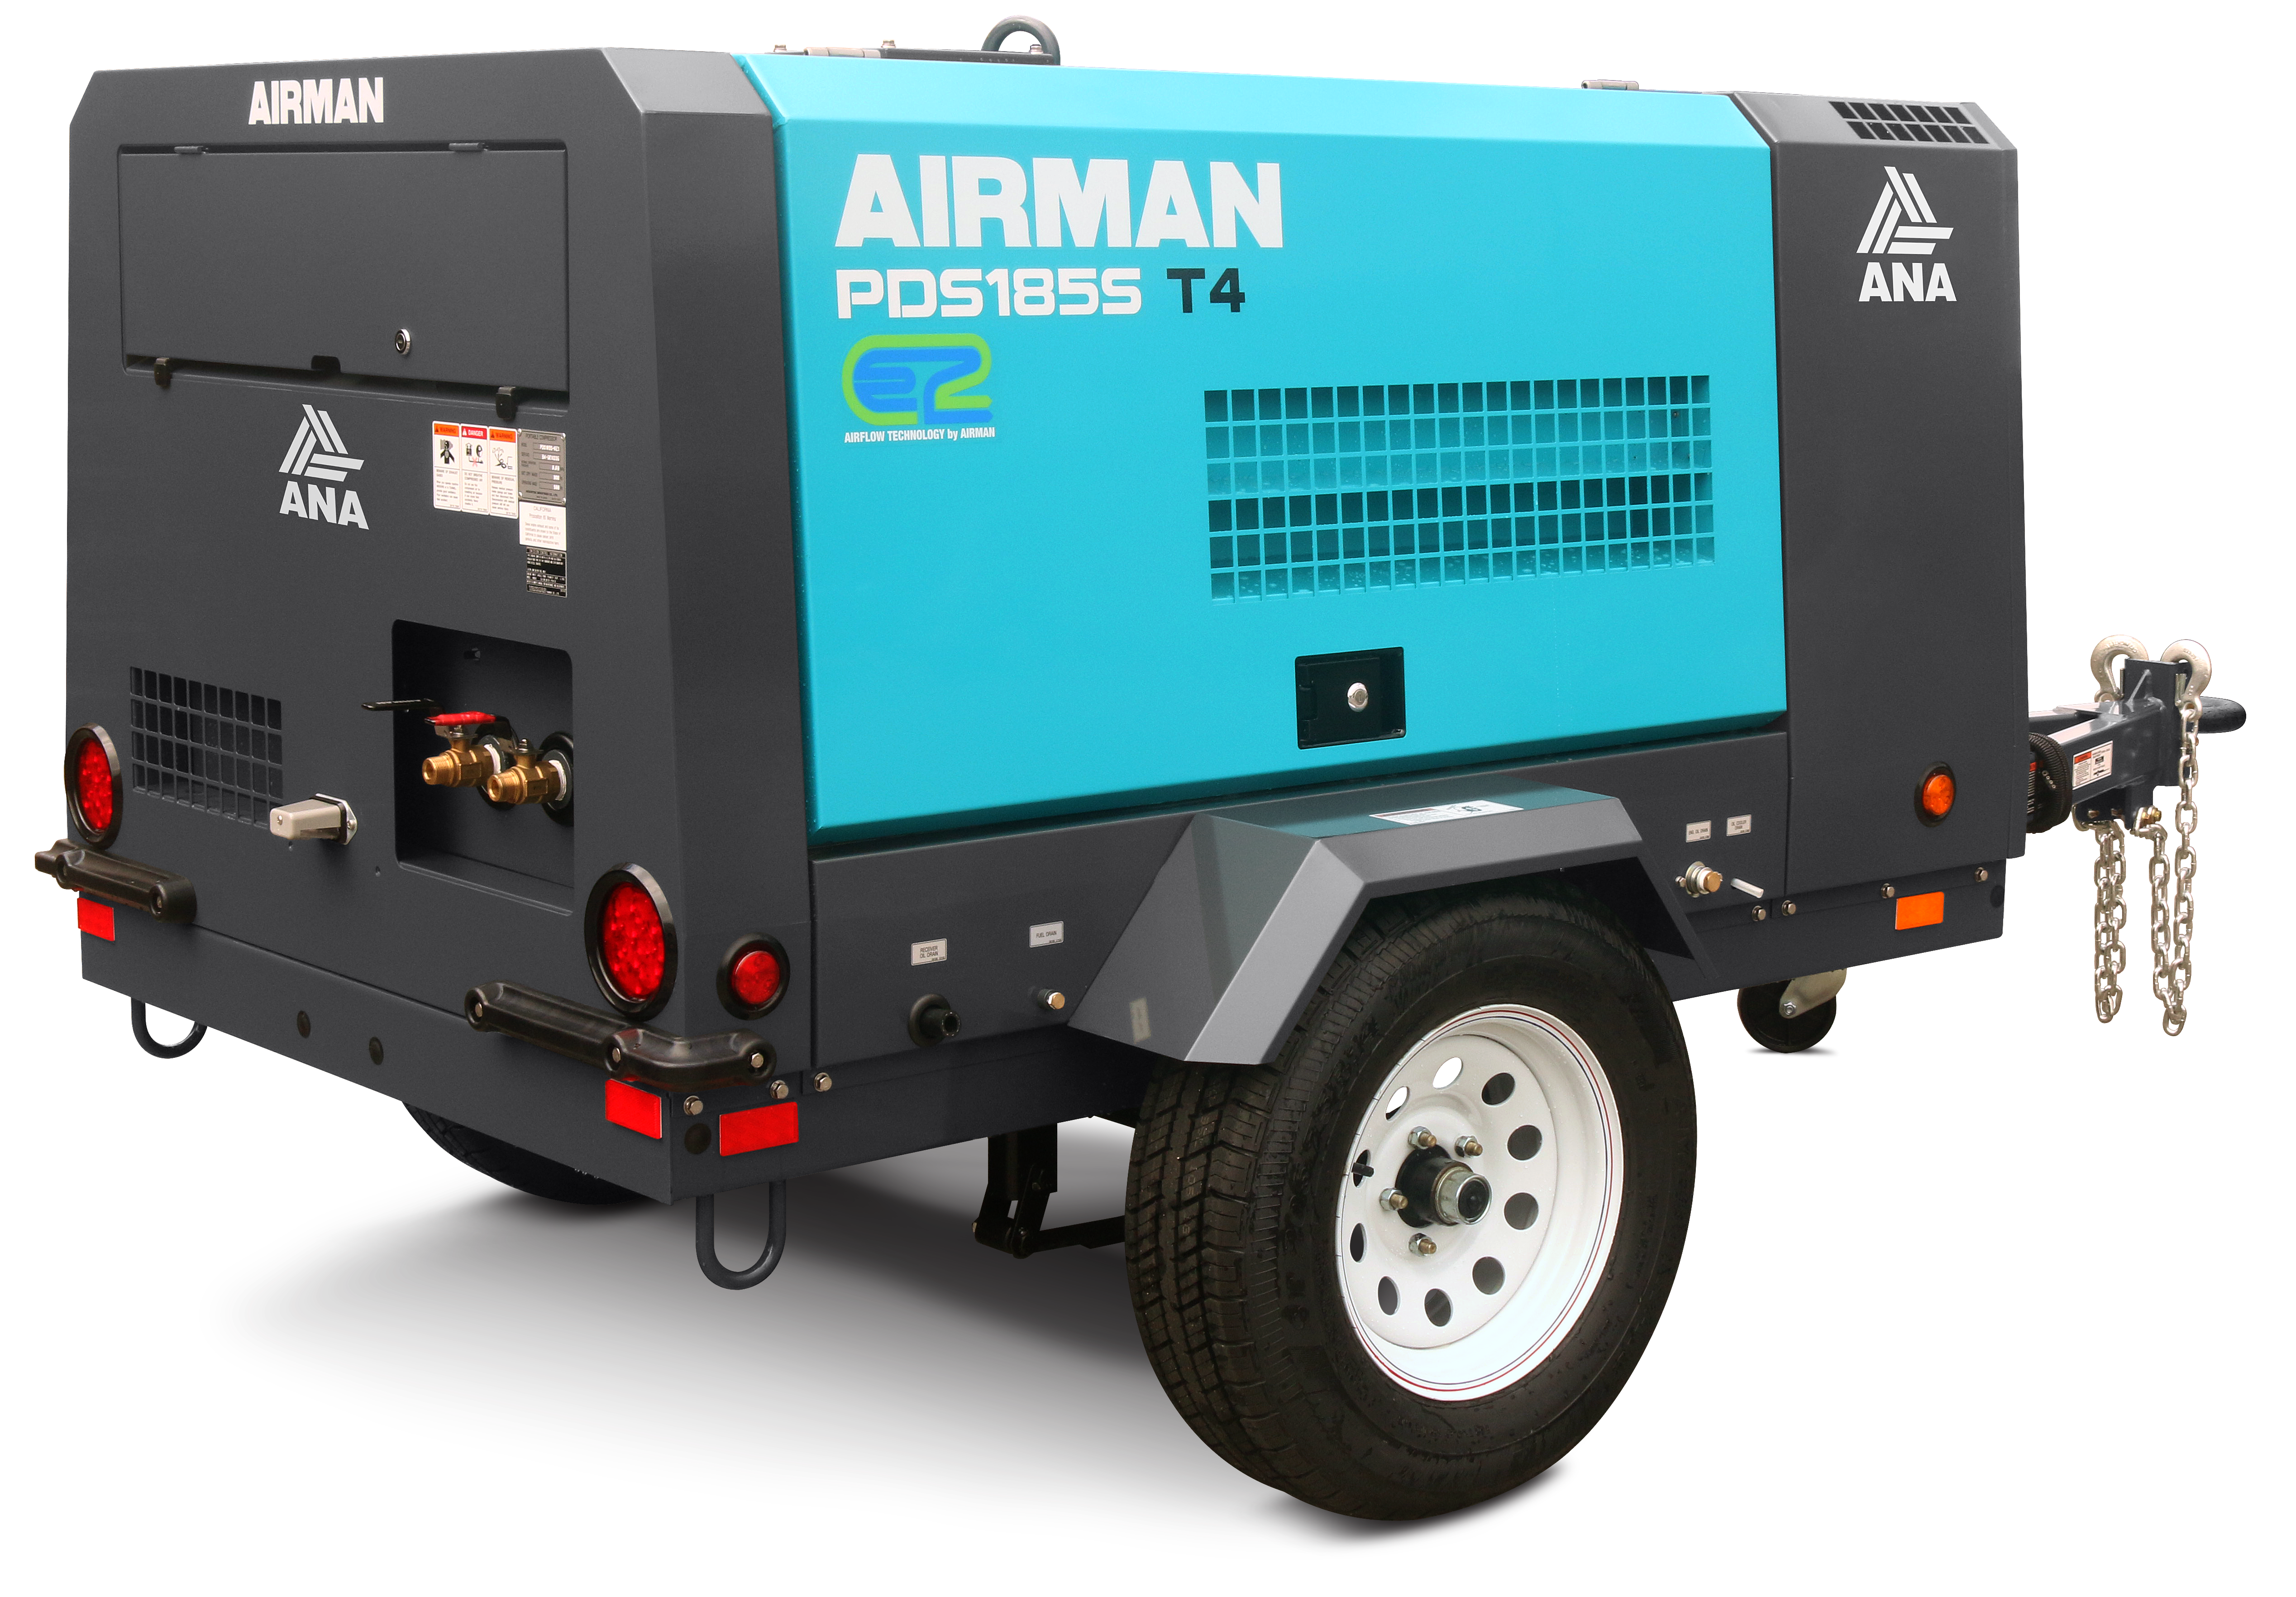 The AIRMAN PDS185 series provides proven power, reliability, longevity, and the superior fit and finish that AIRMAN is known for. If you want bulletproof, don’t settle for anything less than an AIRMAN.